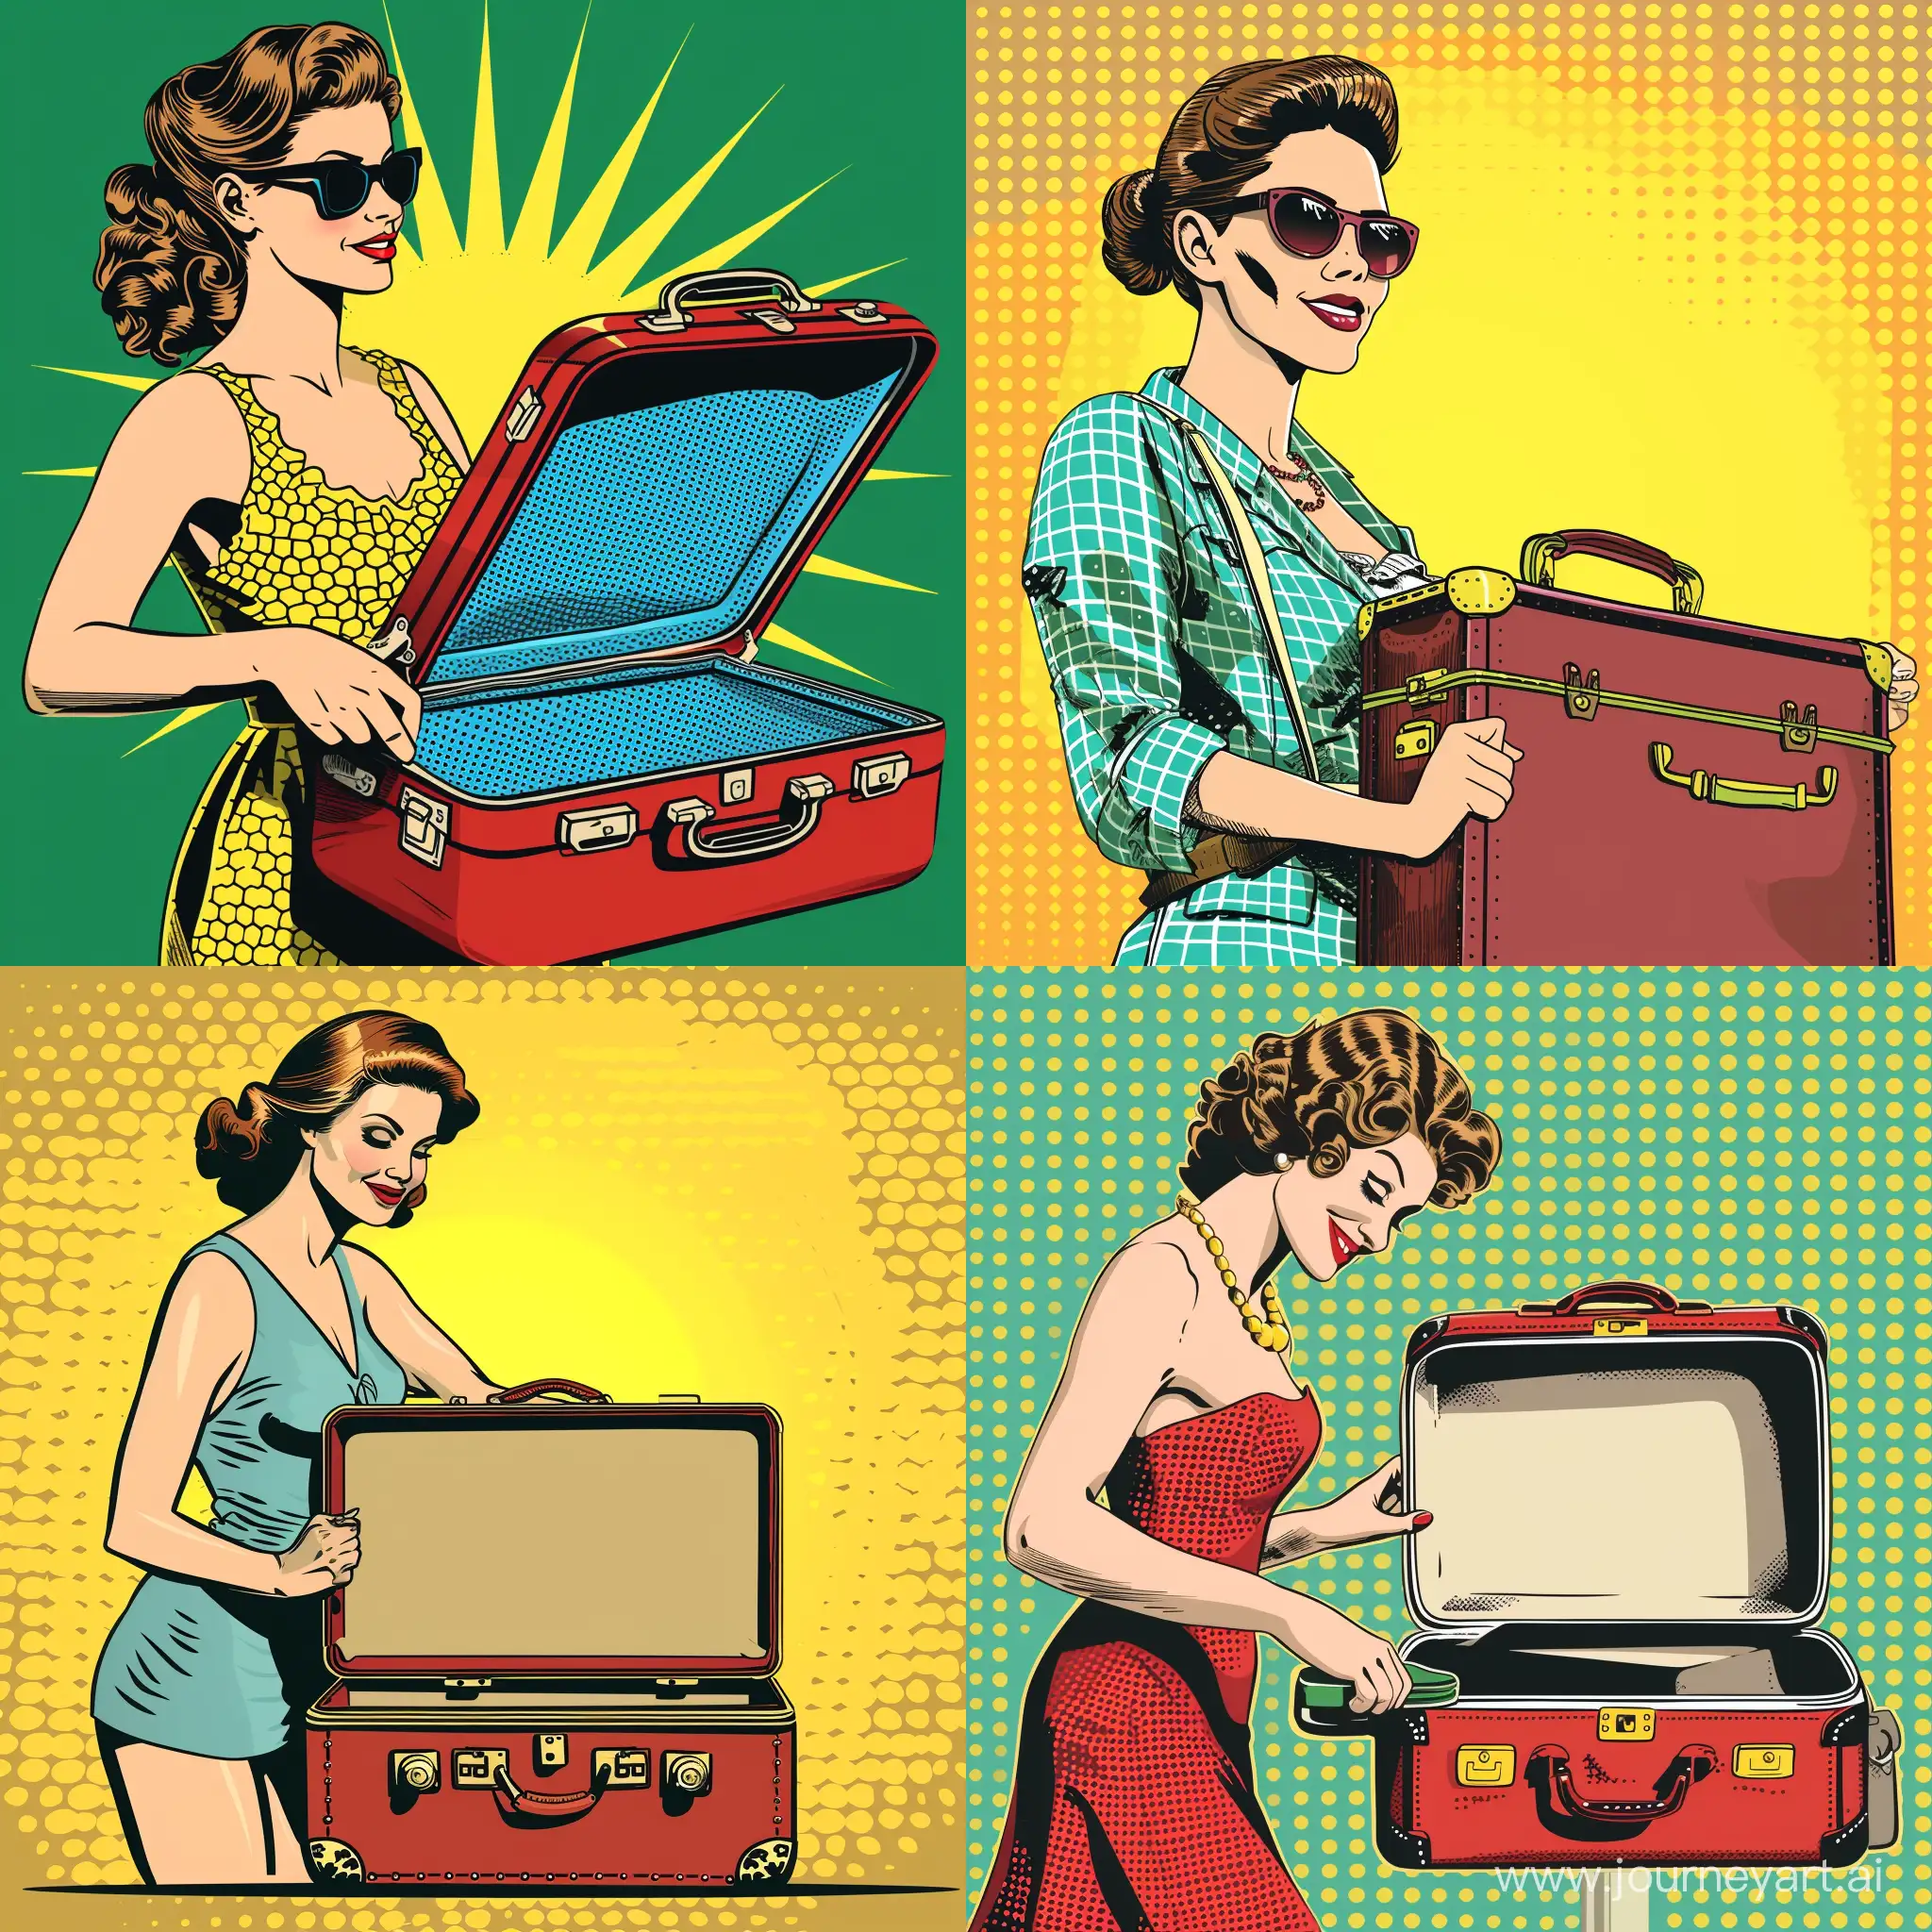 Happy Woman closes suitcase, modern american comic book style.
